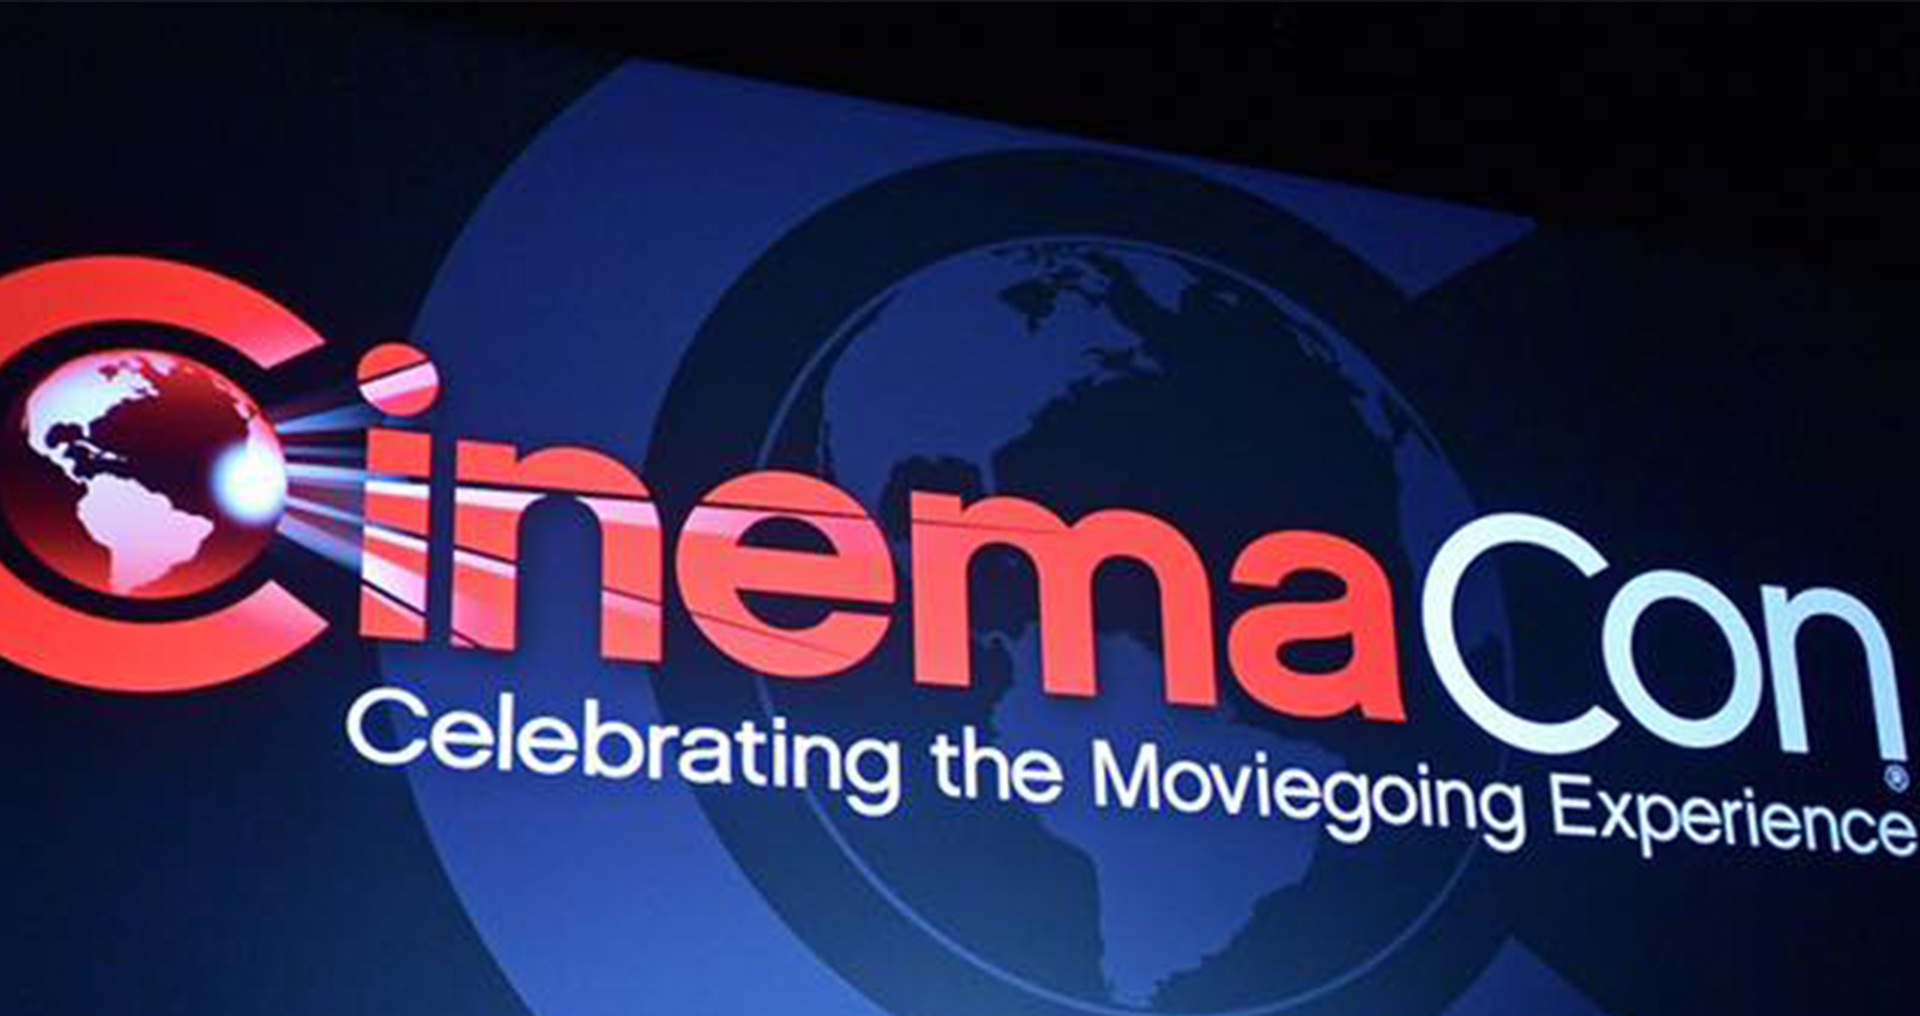 Cinemacon Sony highlights SciFiction